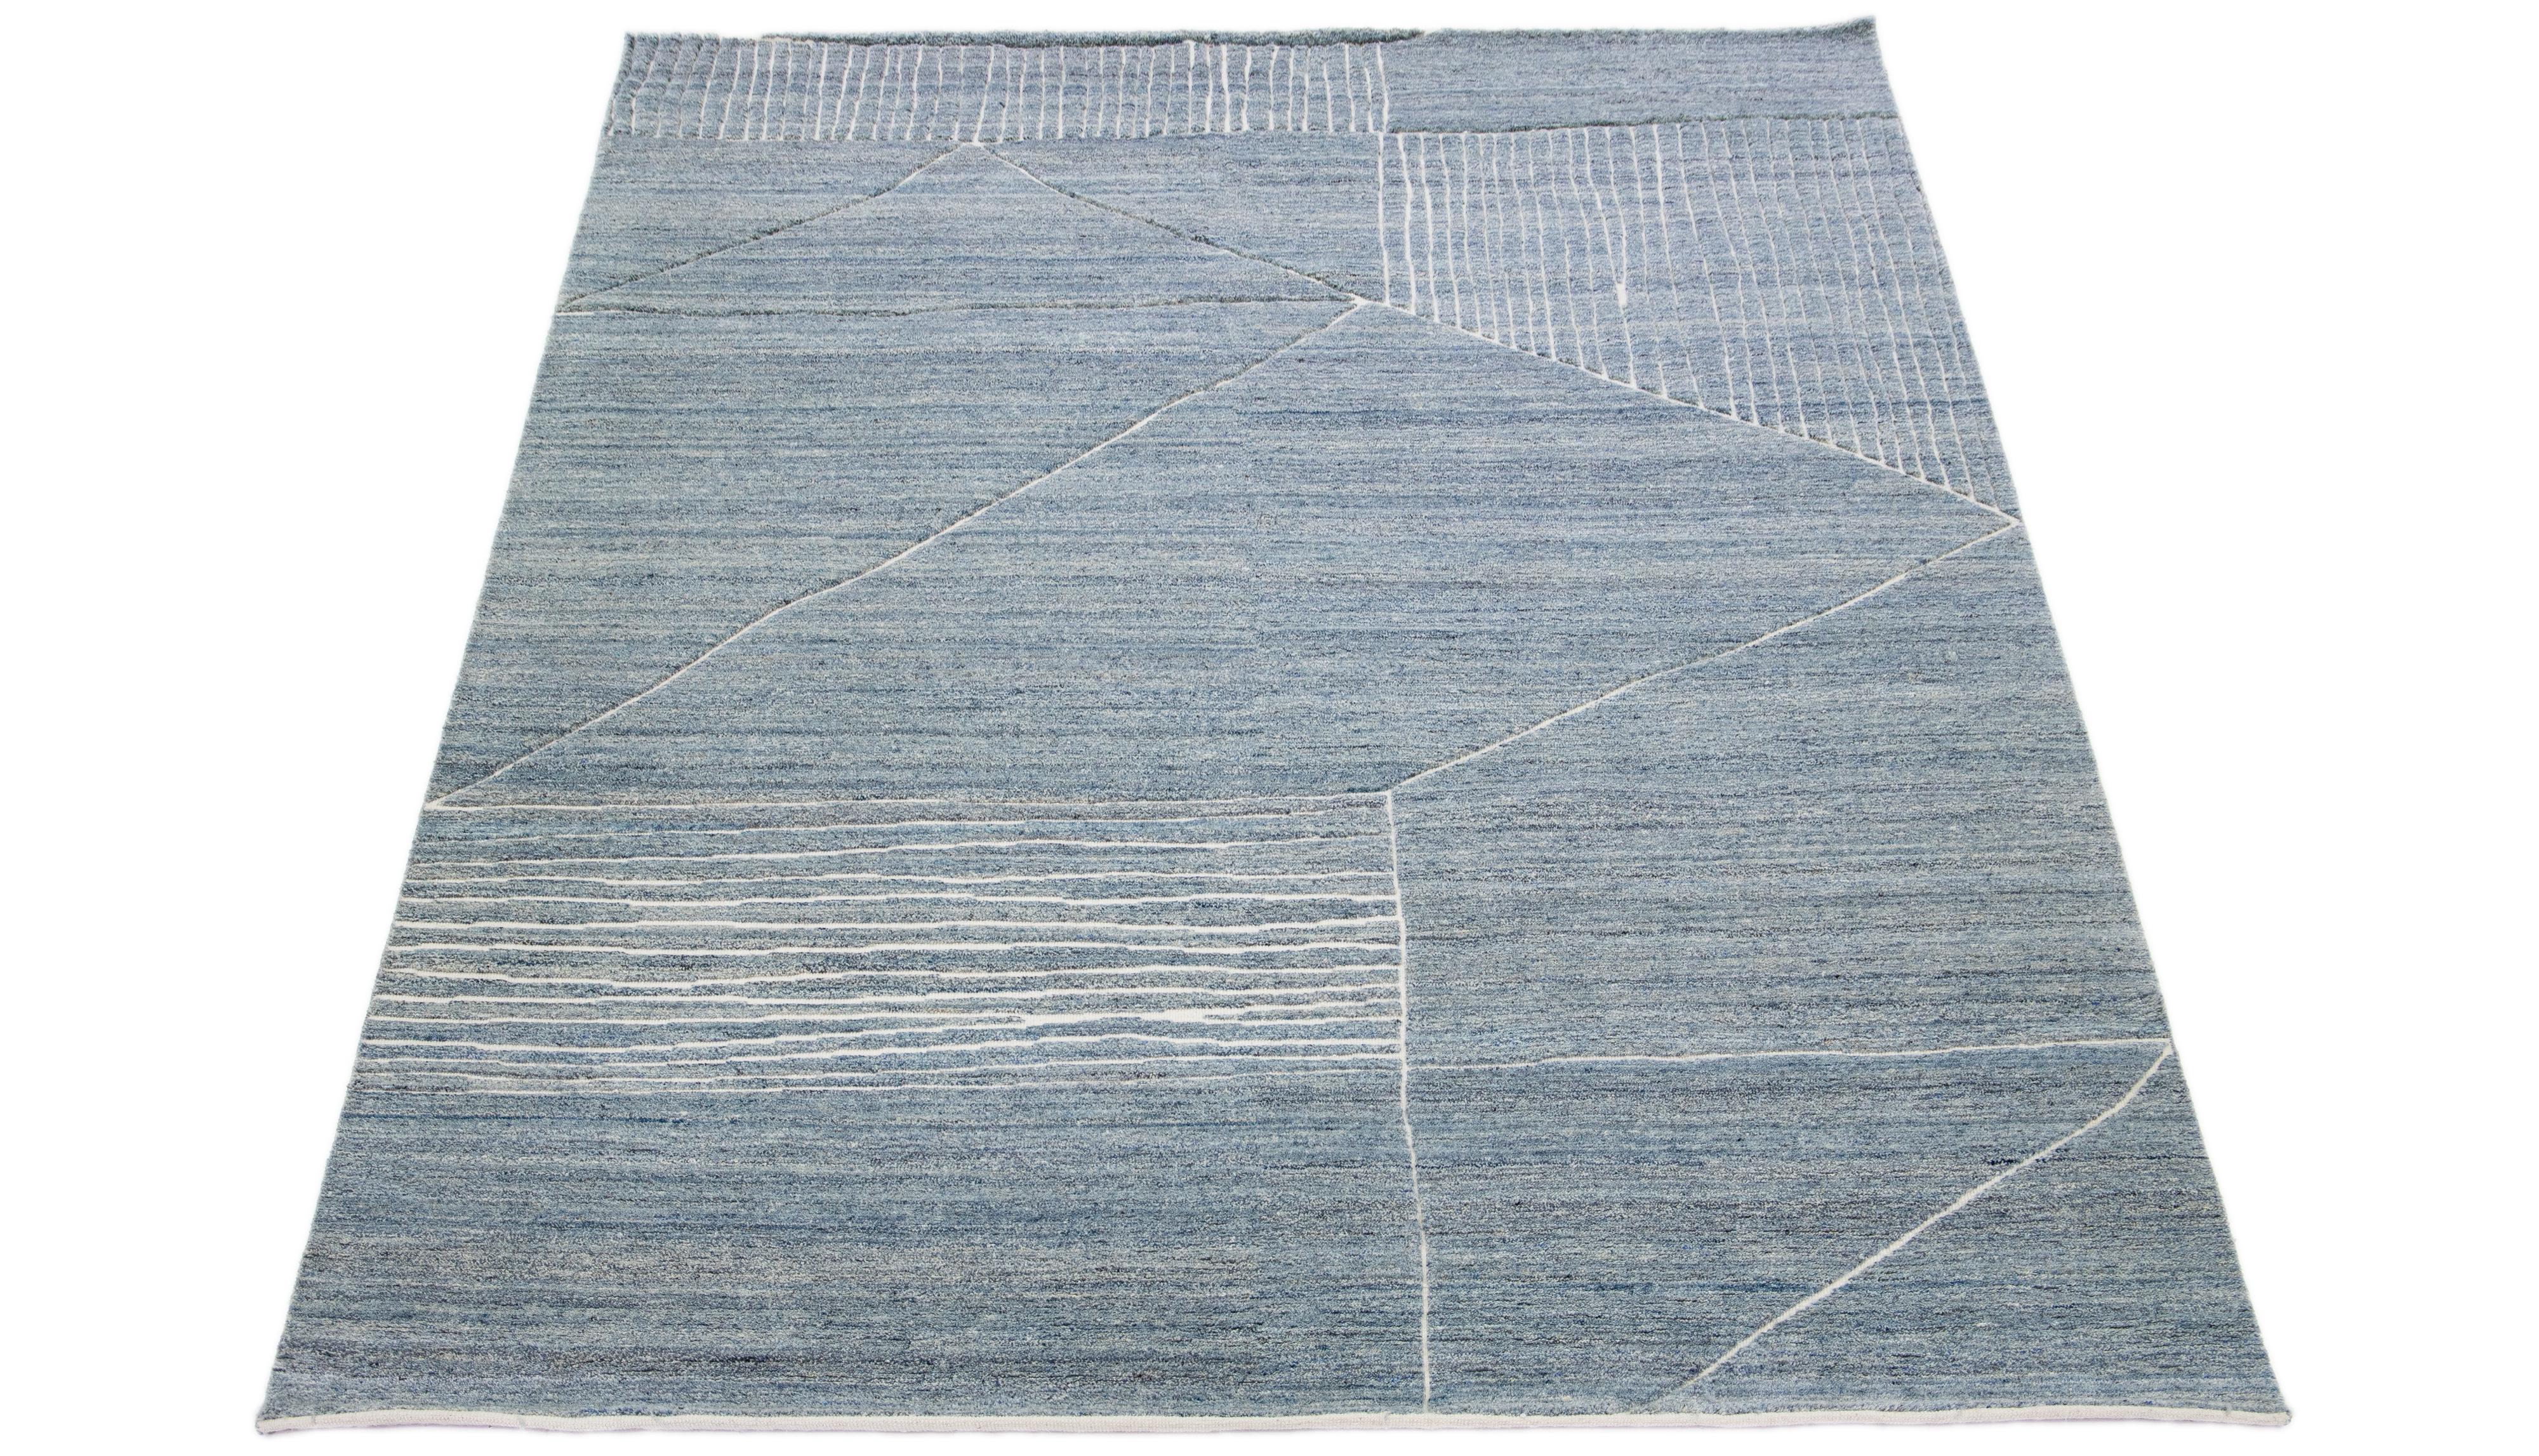 This luxurious wool rug features a timeless Moroccan pattern in a contemporary abstract Minimalist style, utilizing blue tones to create a sleek and modern look. It is crafted using traditional hand-knotting techniques, ensuring exceptional quality